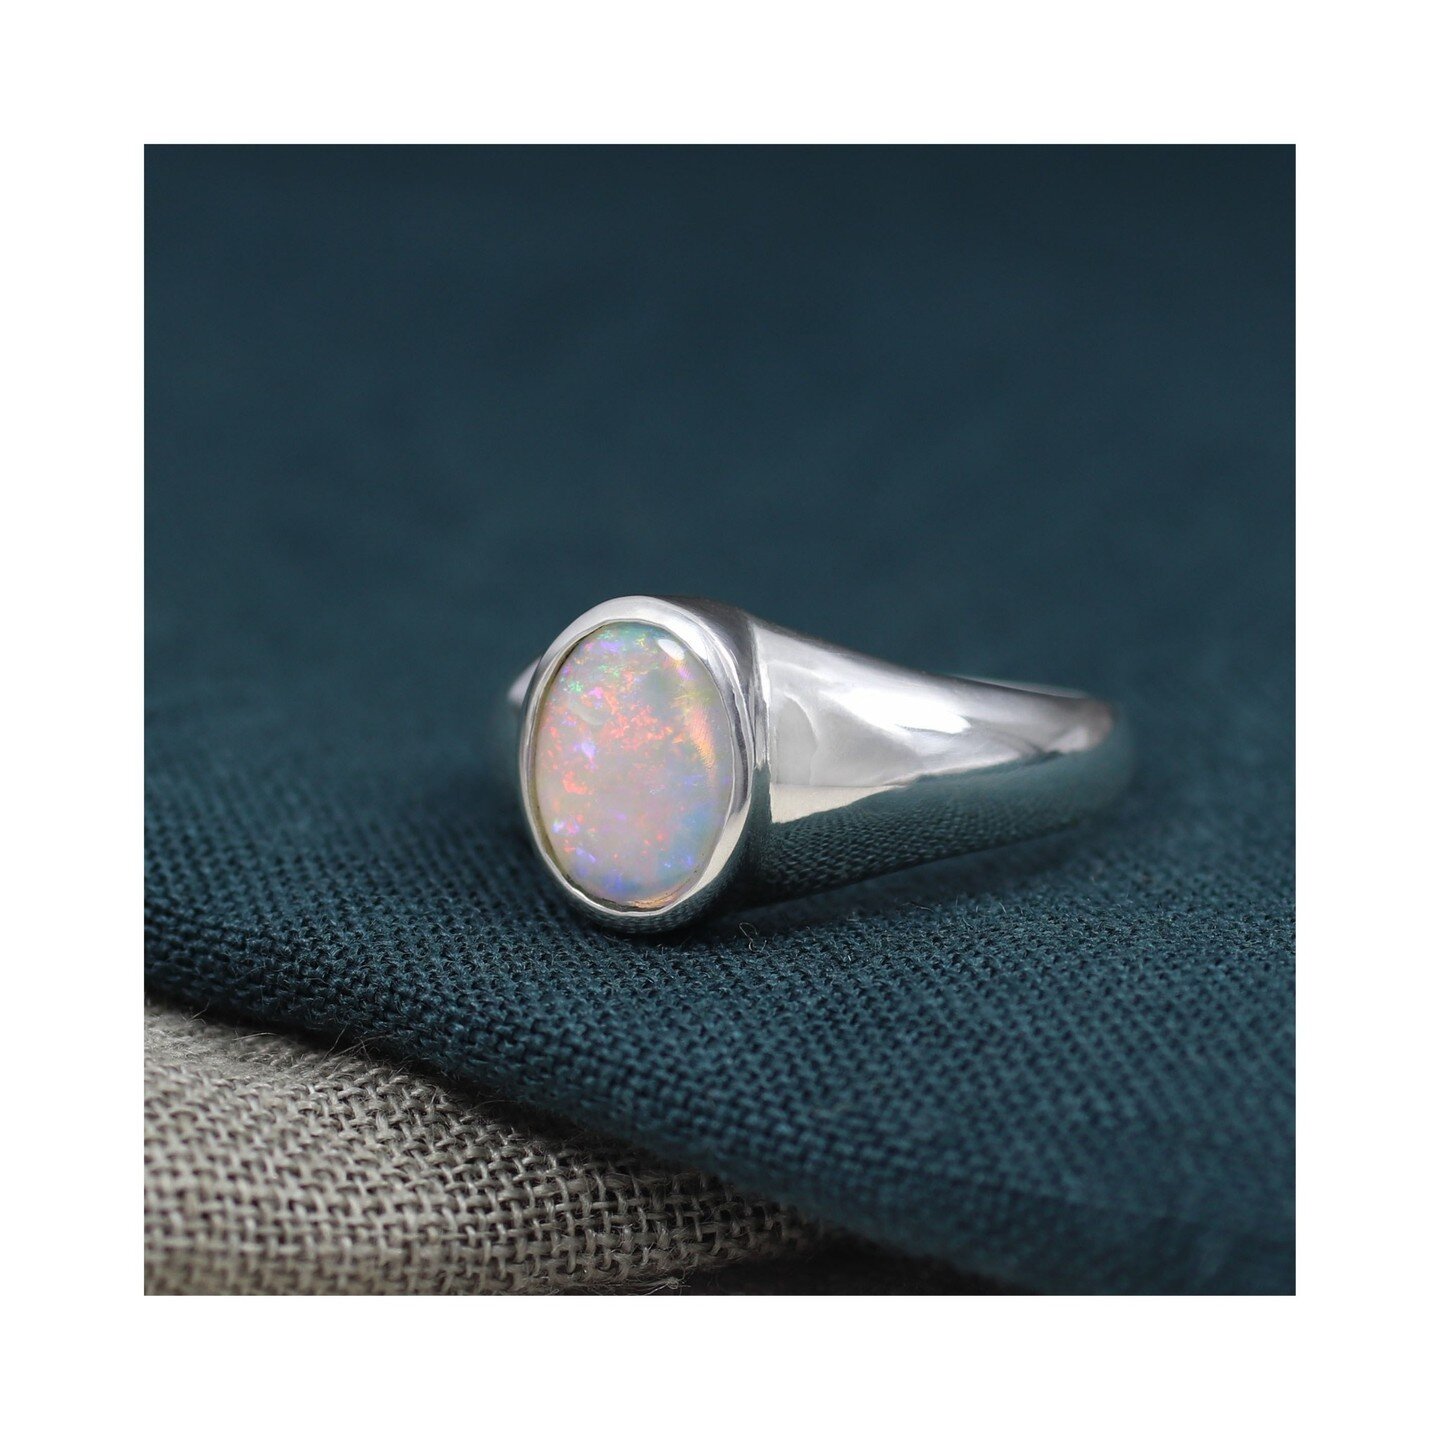 S O P H I A | sterling silver | O 1/2 | available now

#opalring #crystalopaljewellery #sustainablejewellery #signetring